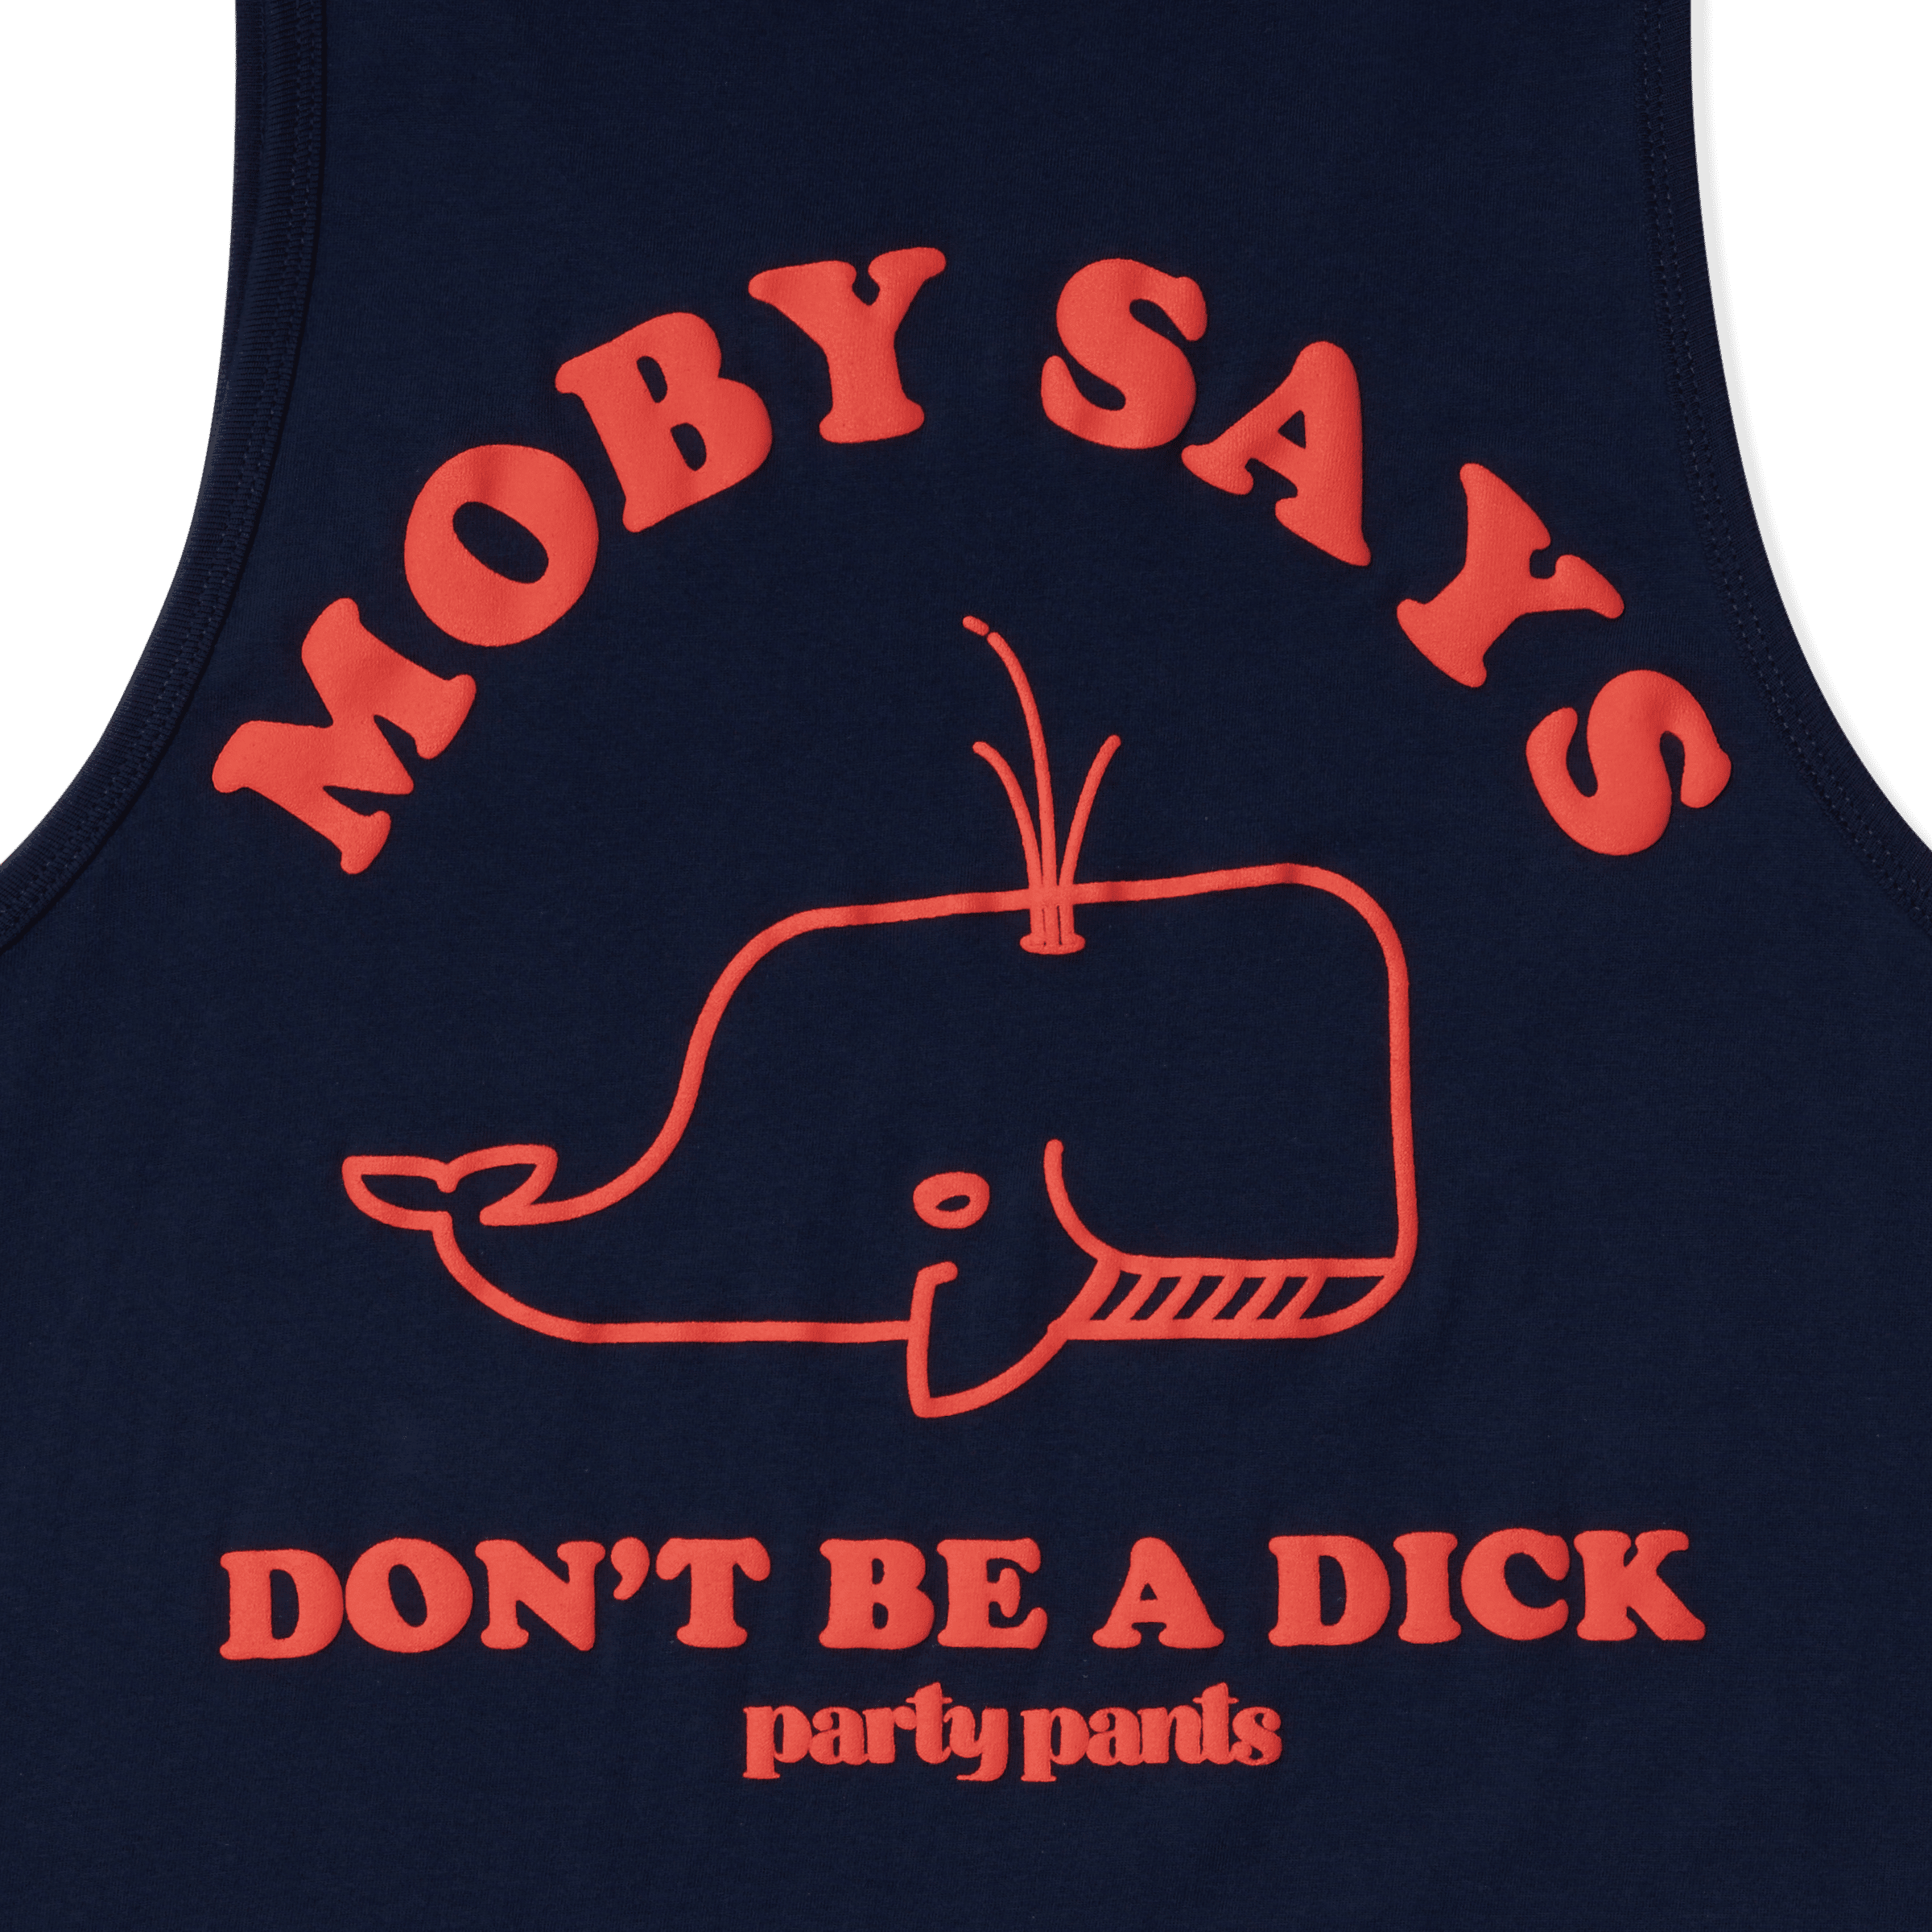 MOBY SAYS TANK - NAVY TANK PARTY PANTS 